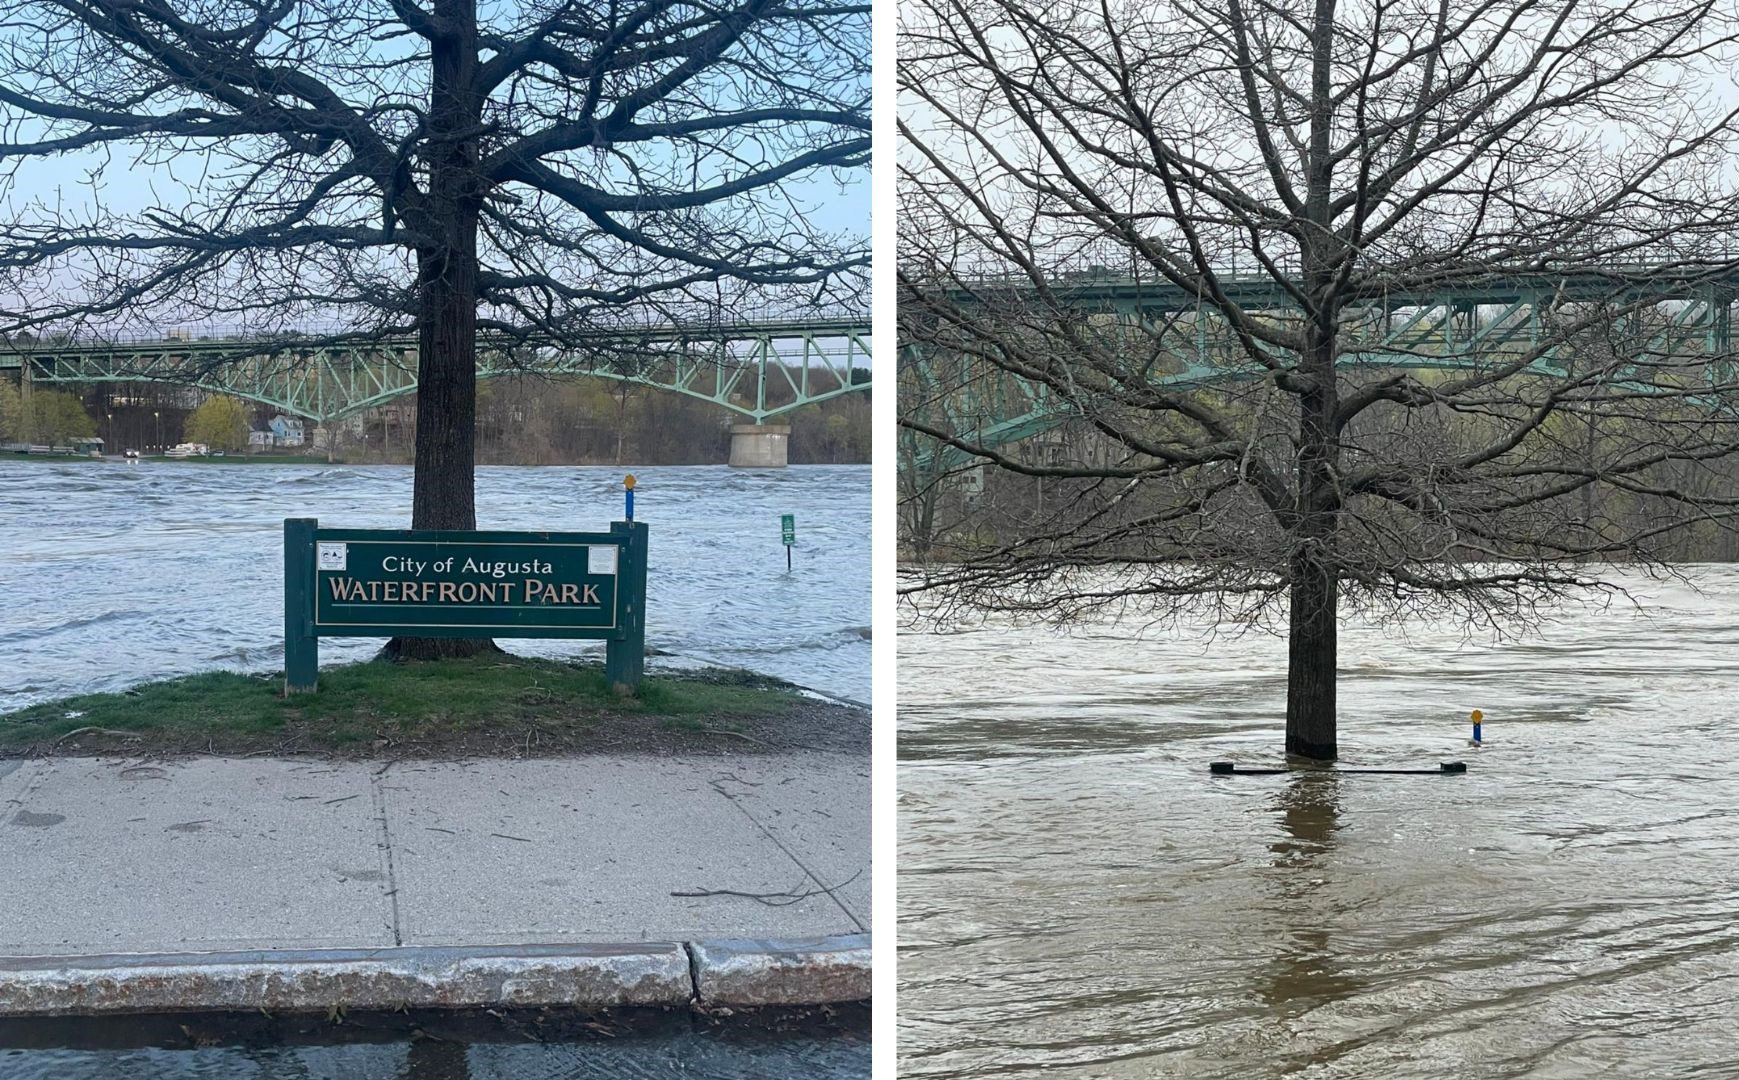 How is climate change affecting river flooding in Maine?